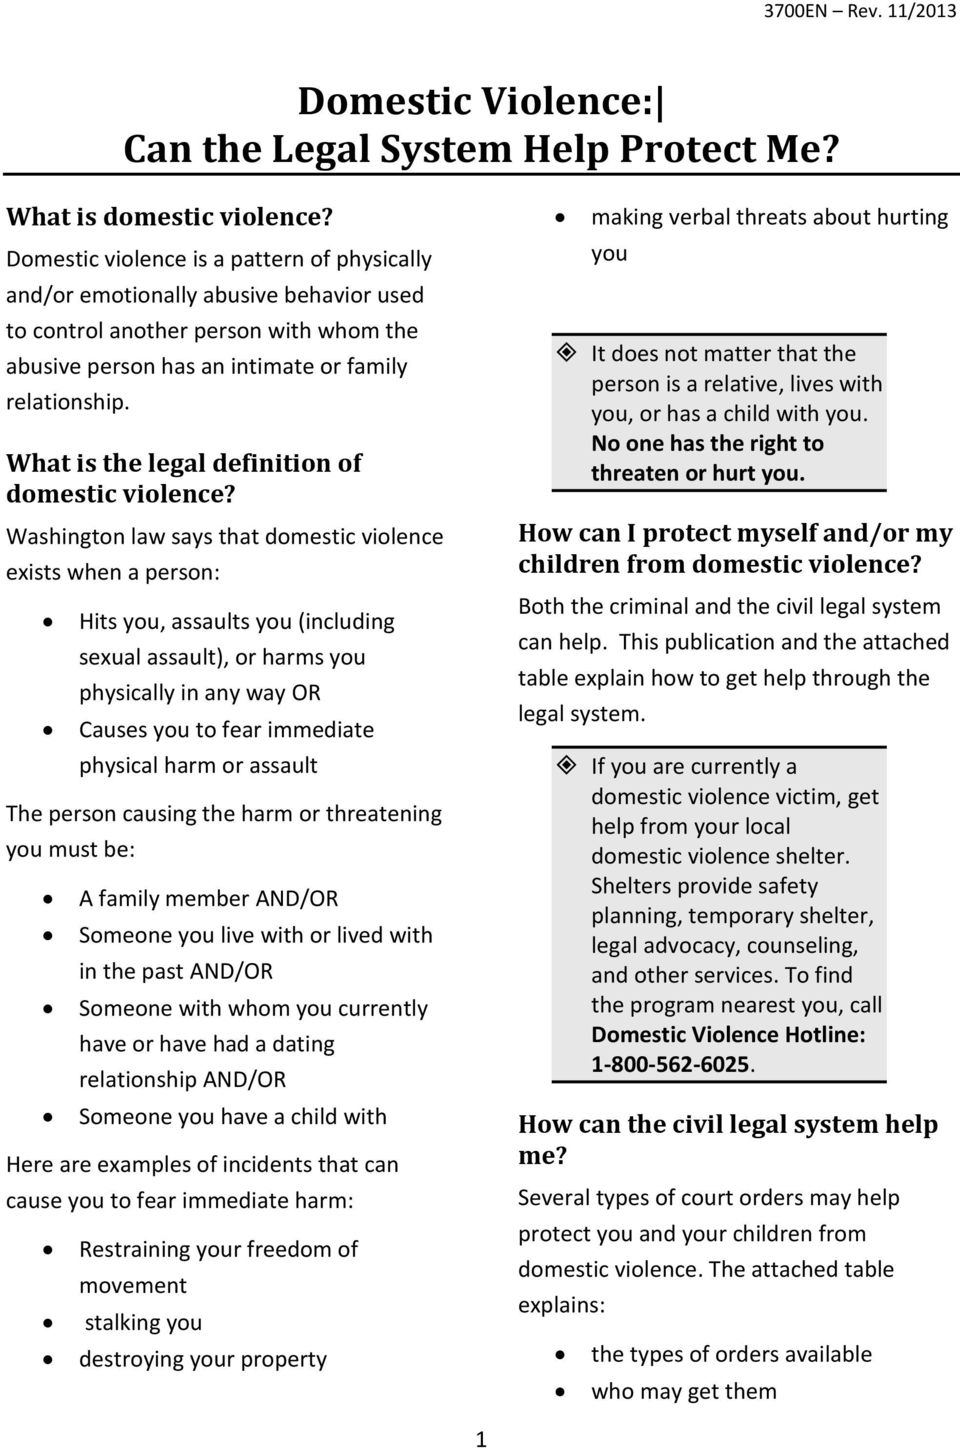 domestic violence: can the legal system help protect me? - pdf